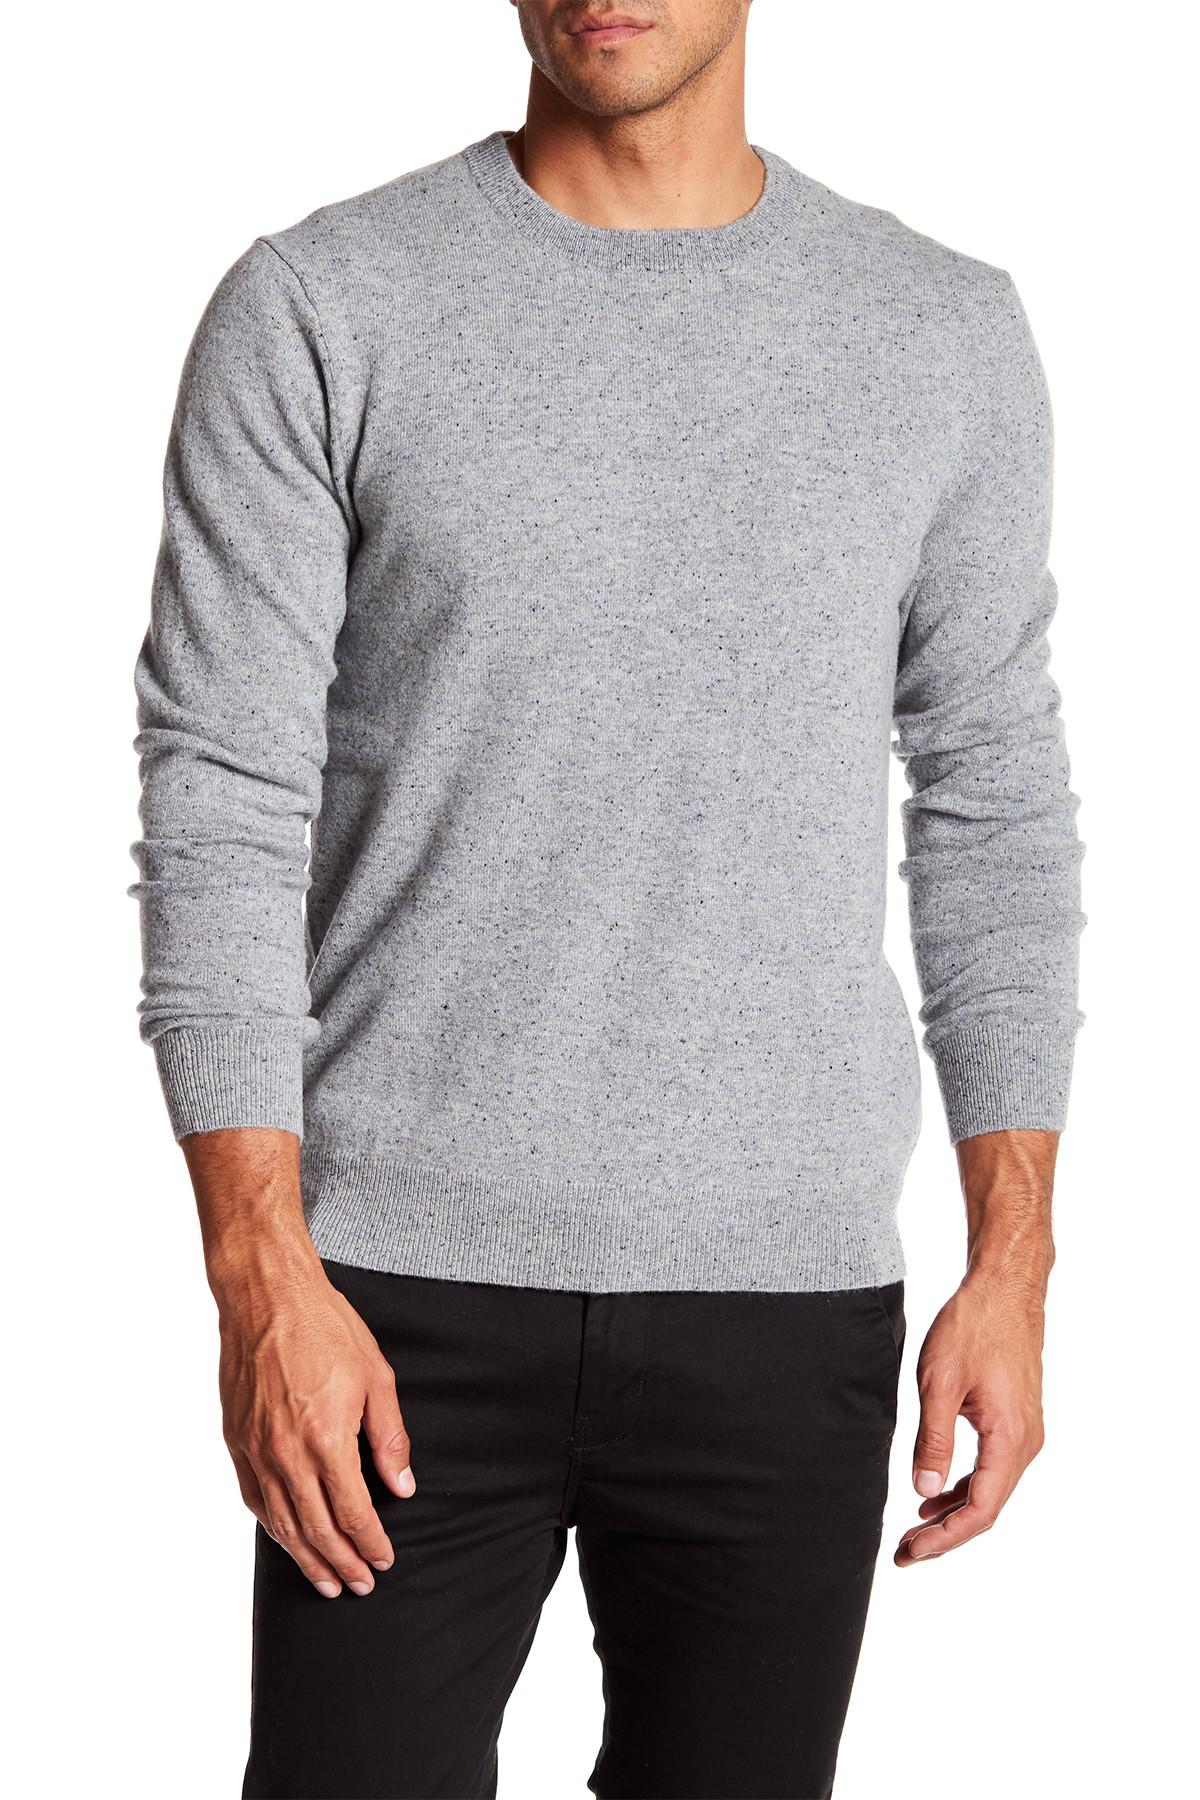 Lyst - Qi Cashmere Crew Neck Sweater in Gray for Men